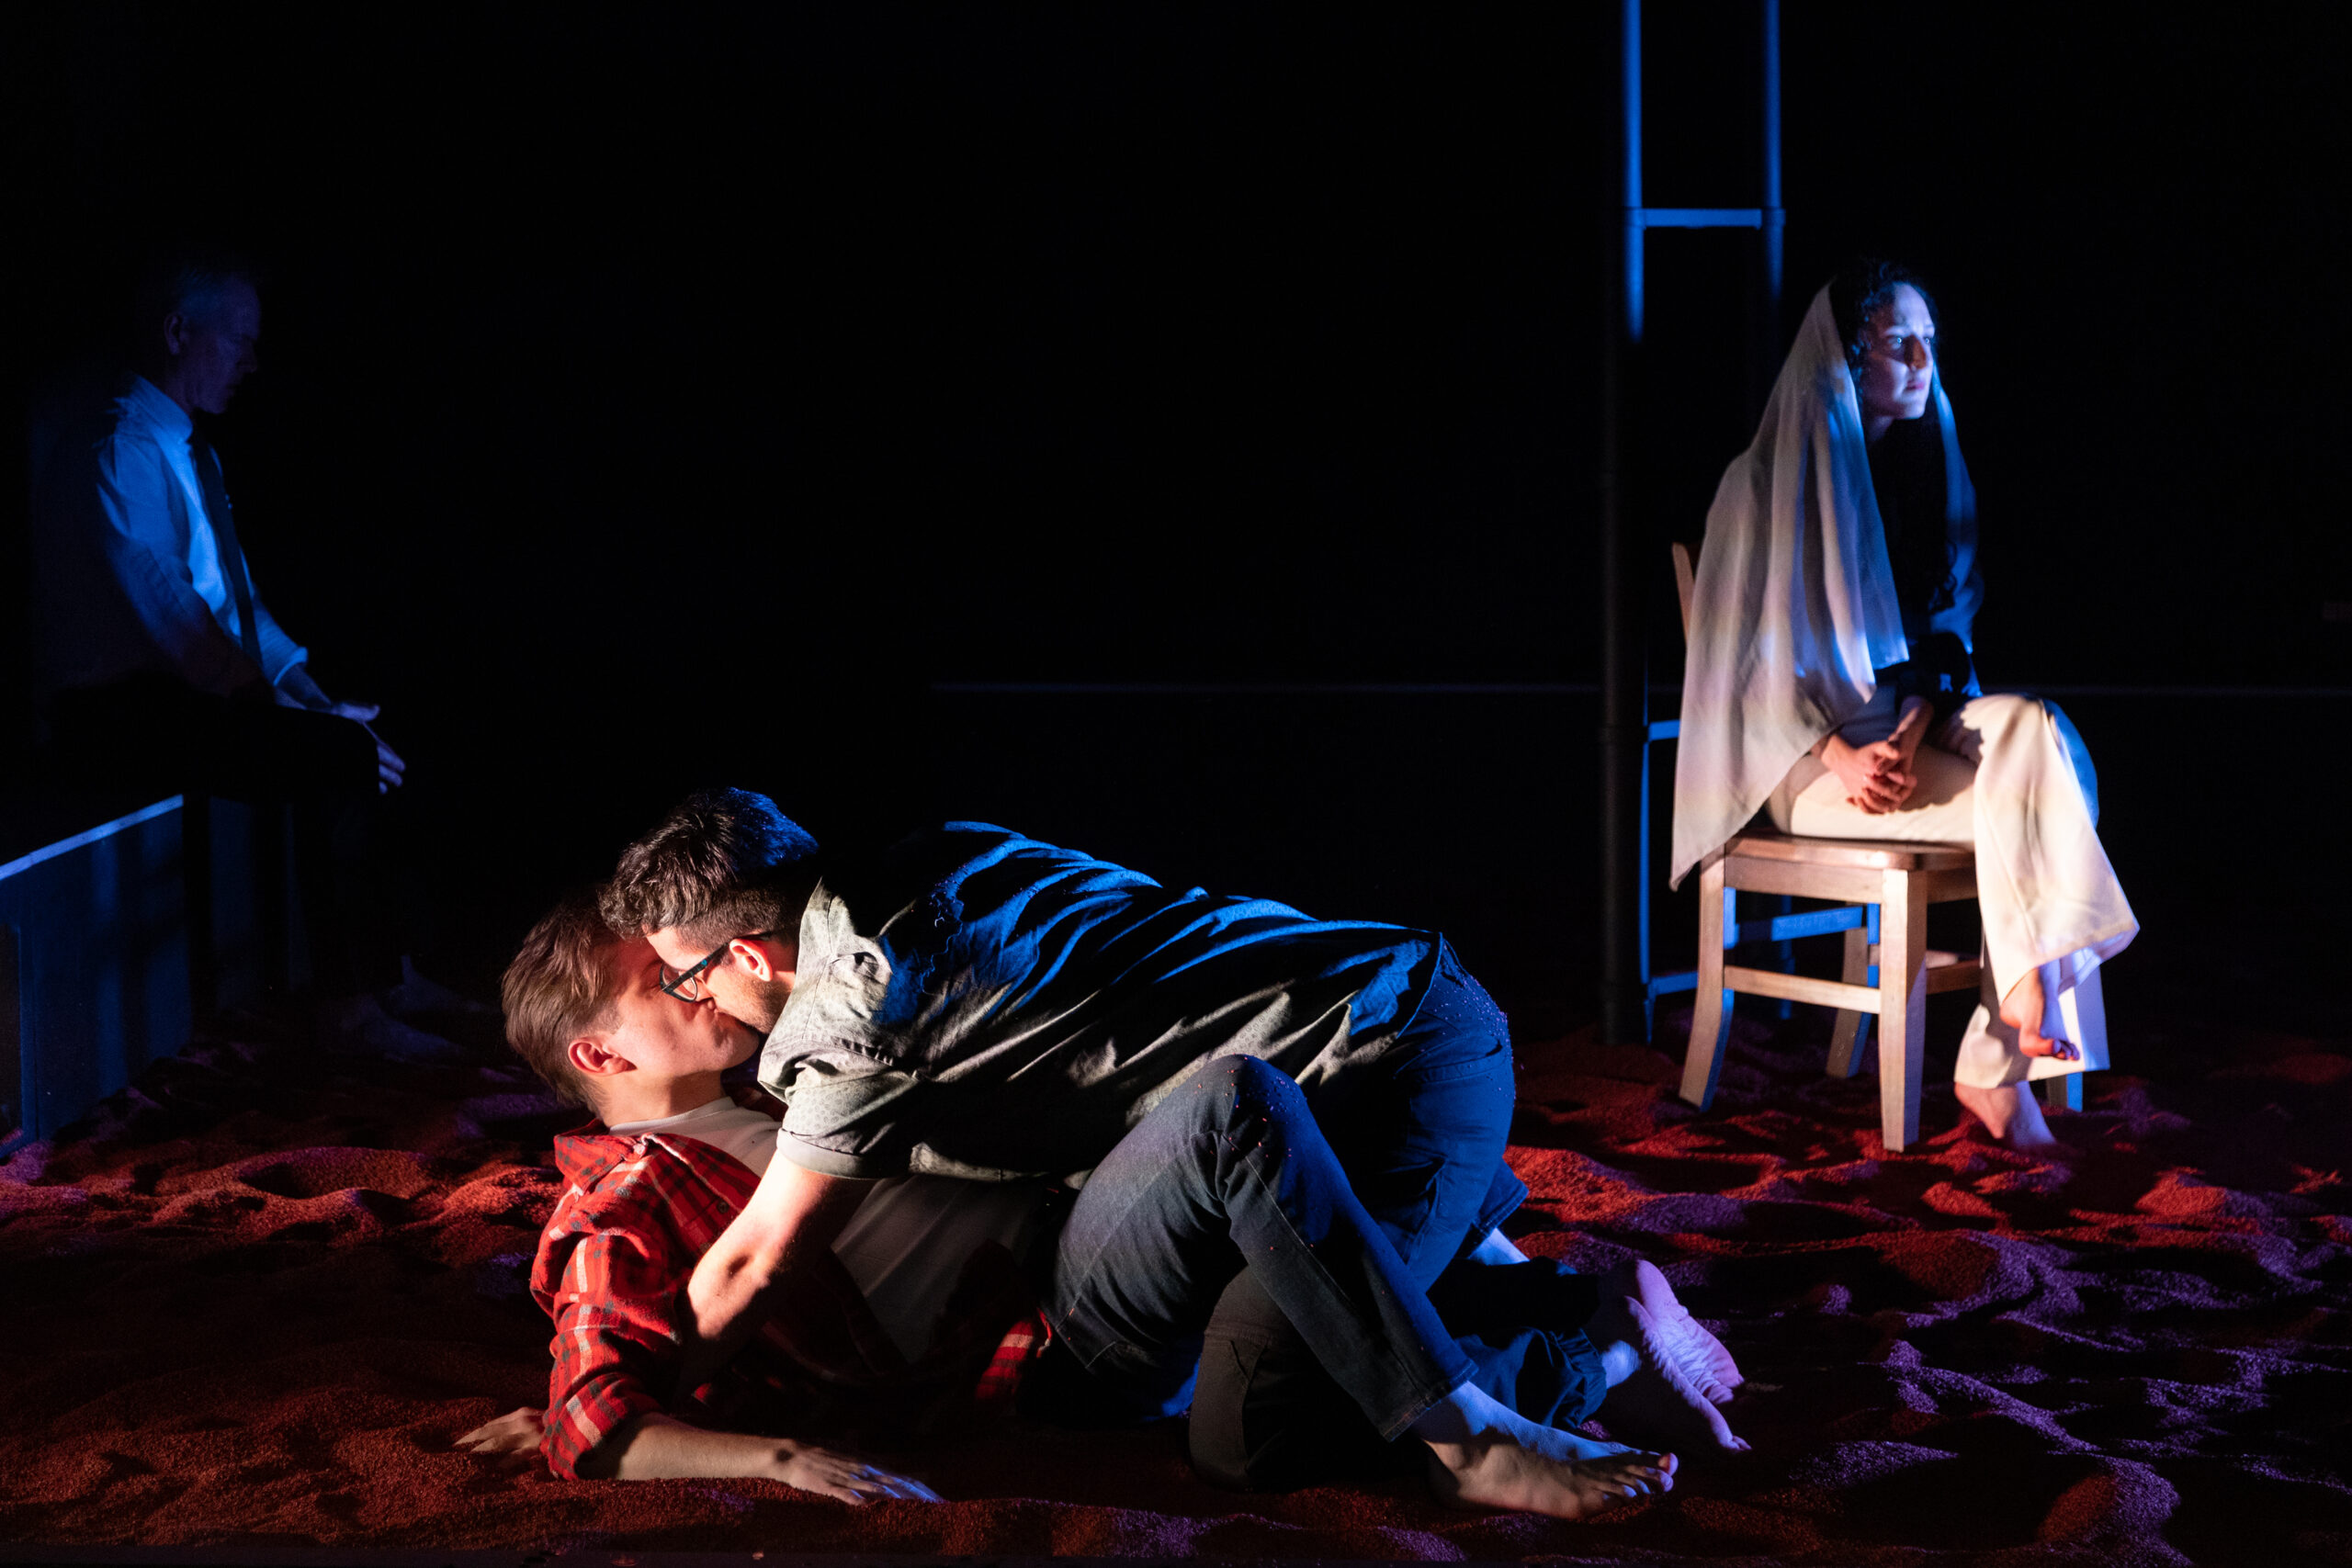 Production photo of Hooves featuring two men on top of each other, kissing. In the background, a woman sits on a chair in dramatic lighting.